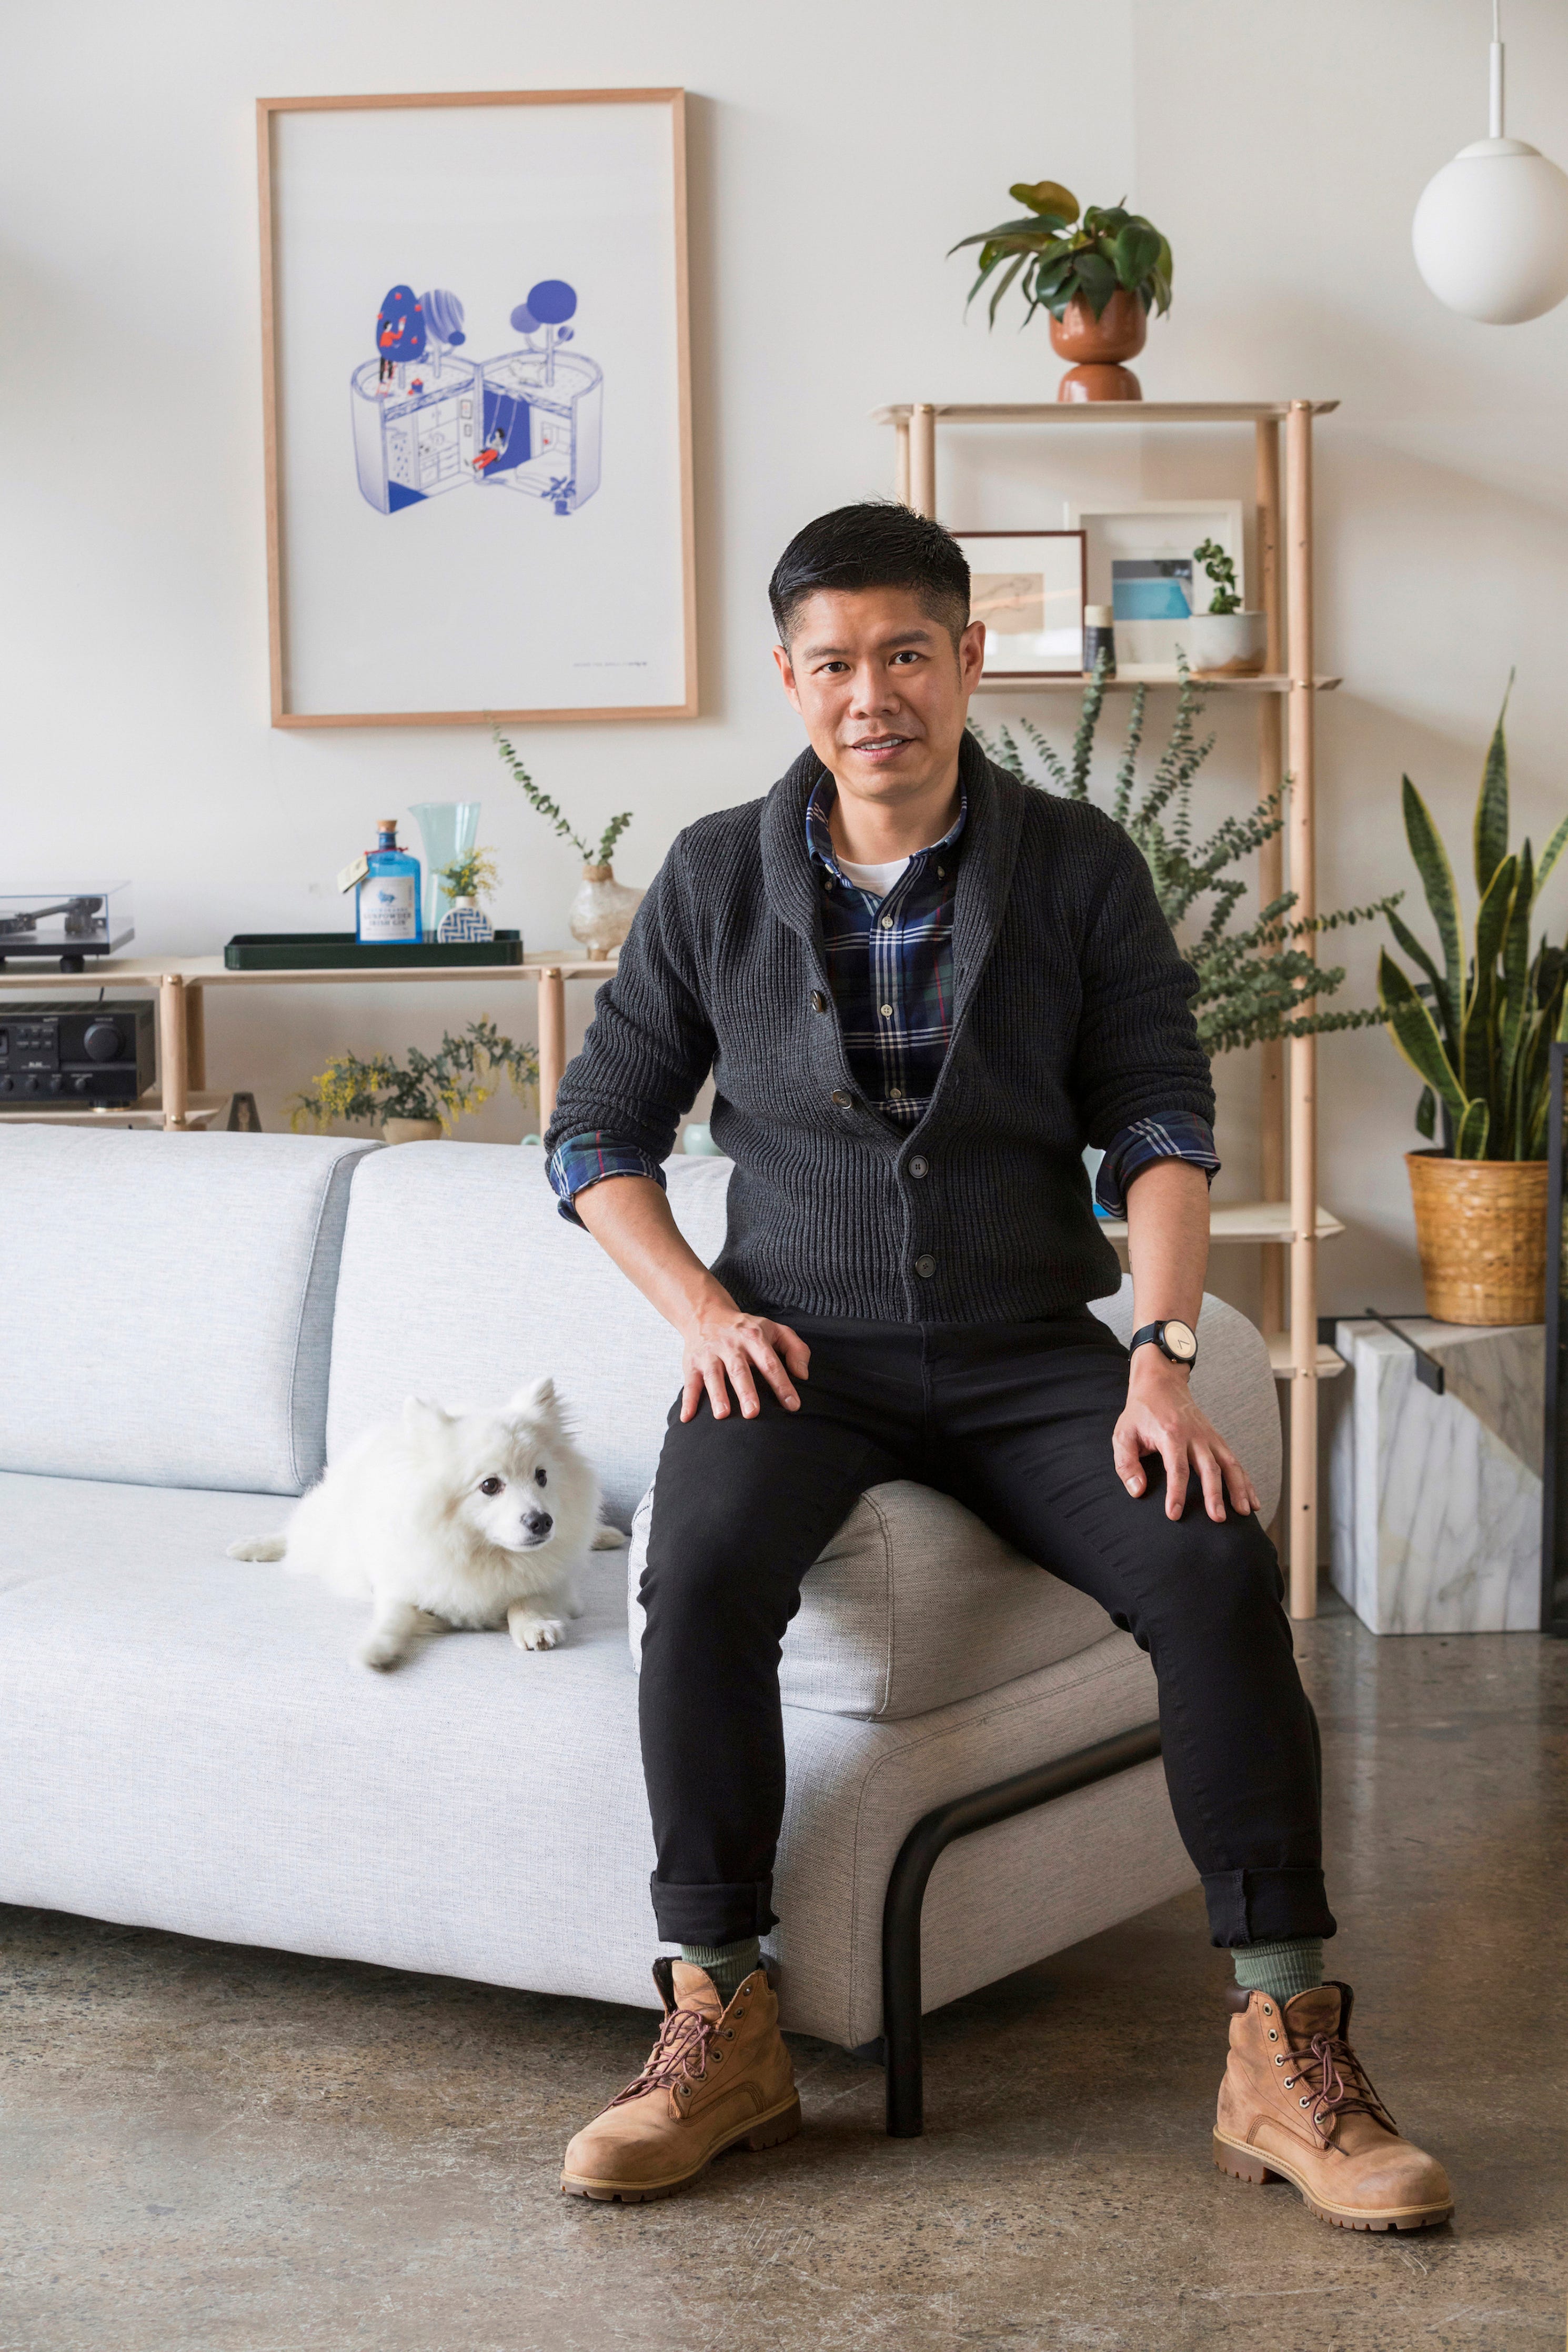 Colin Chee of Never Too Small: 5 Things You Can Do To Help Your Living Space  Spark More Joy, by Candice Georgiadis, Authority Magazine